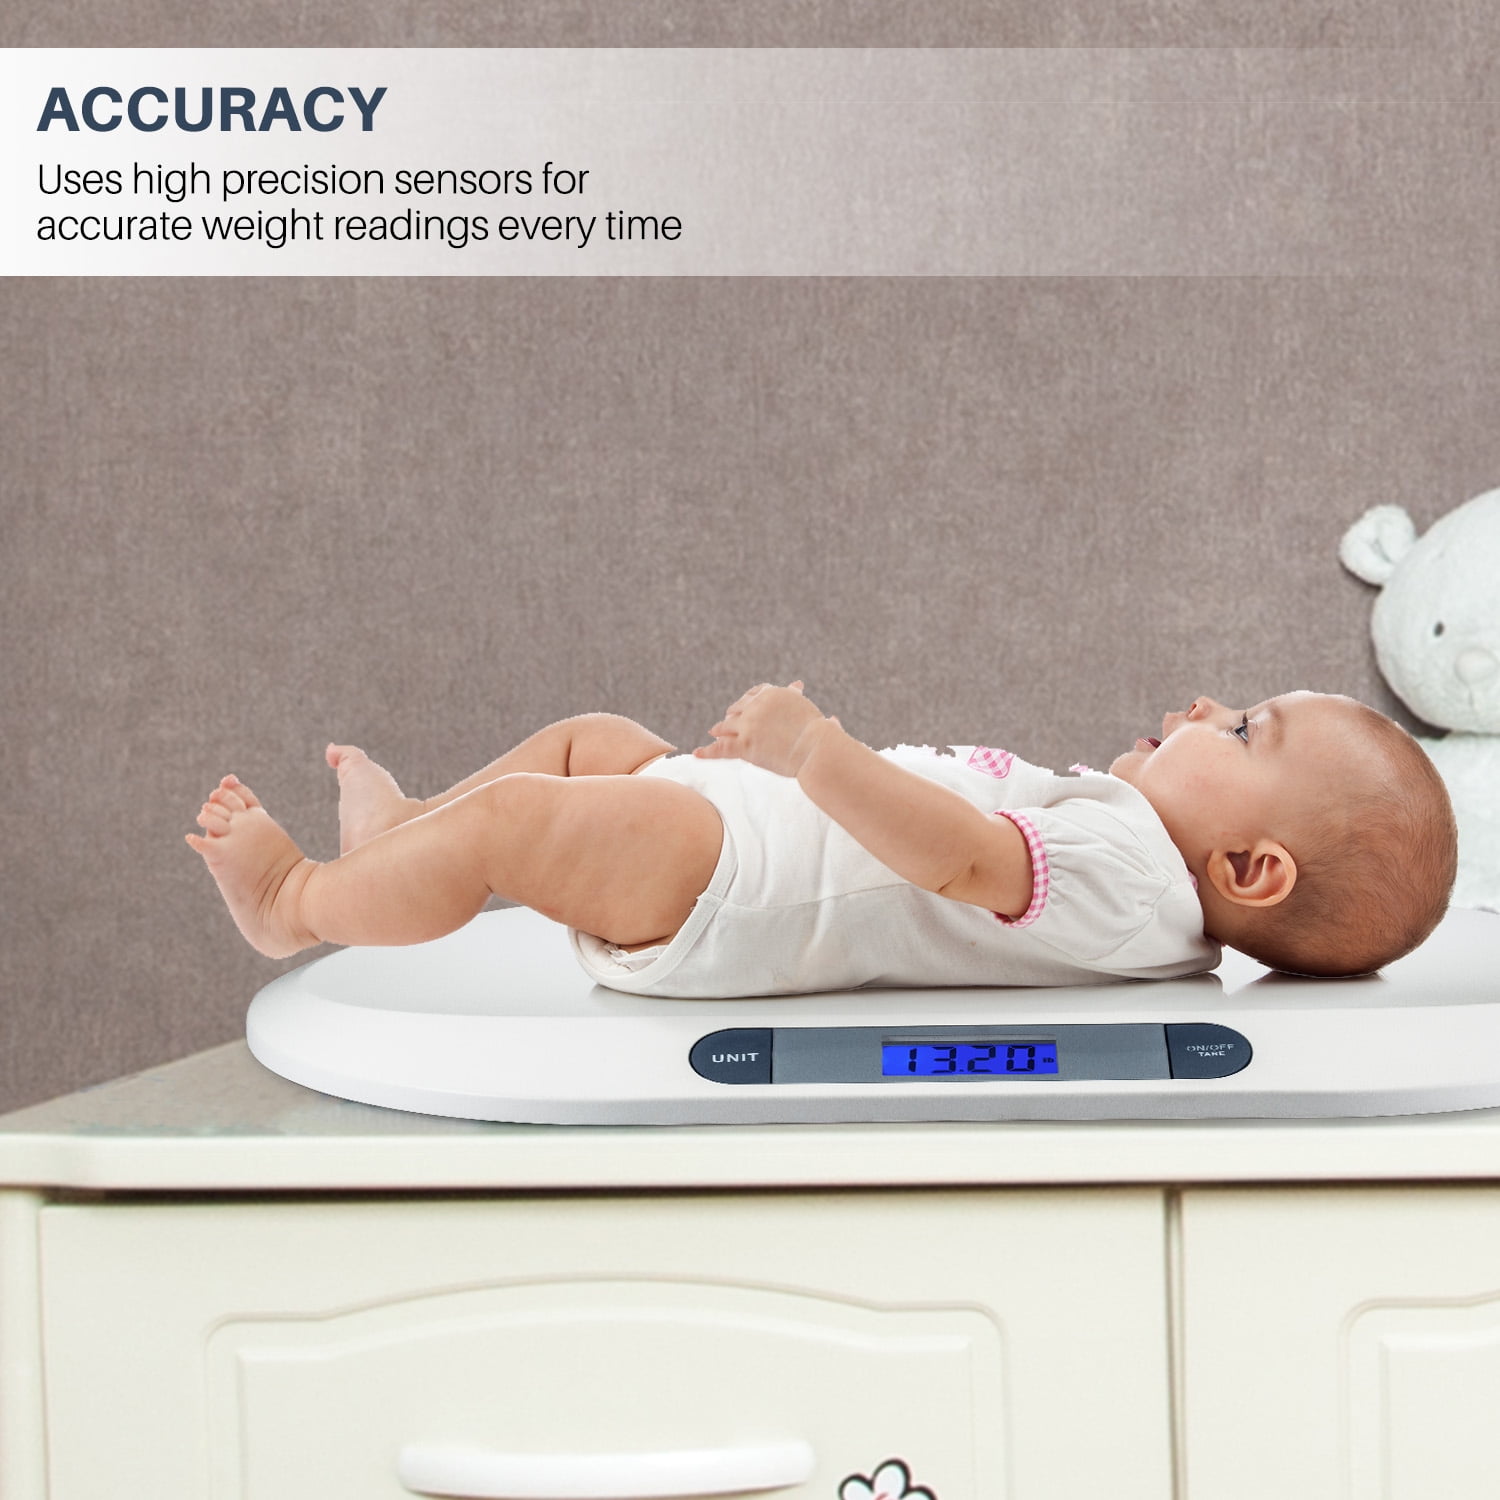 Baby weighing scale with open weighing surface